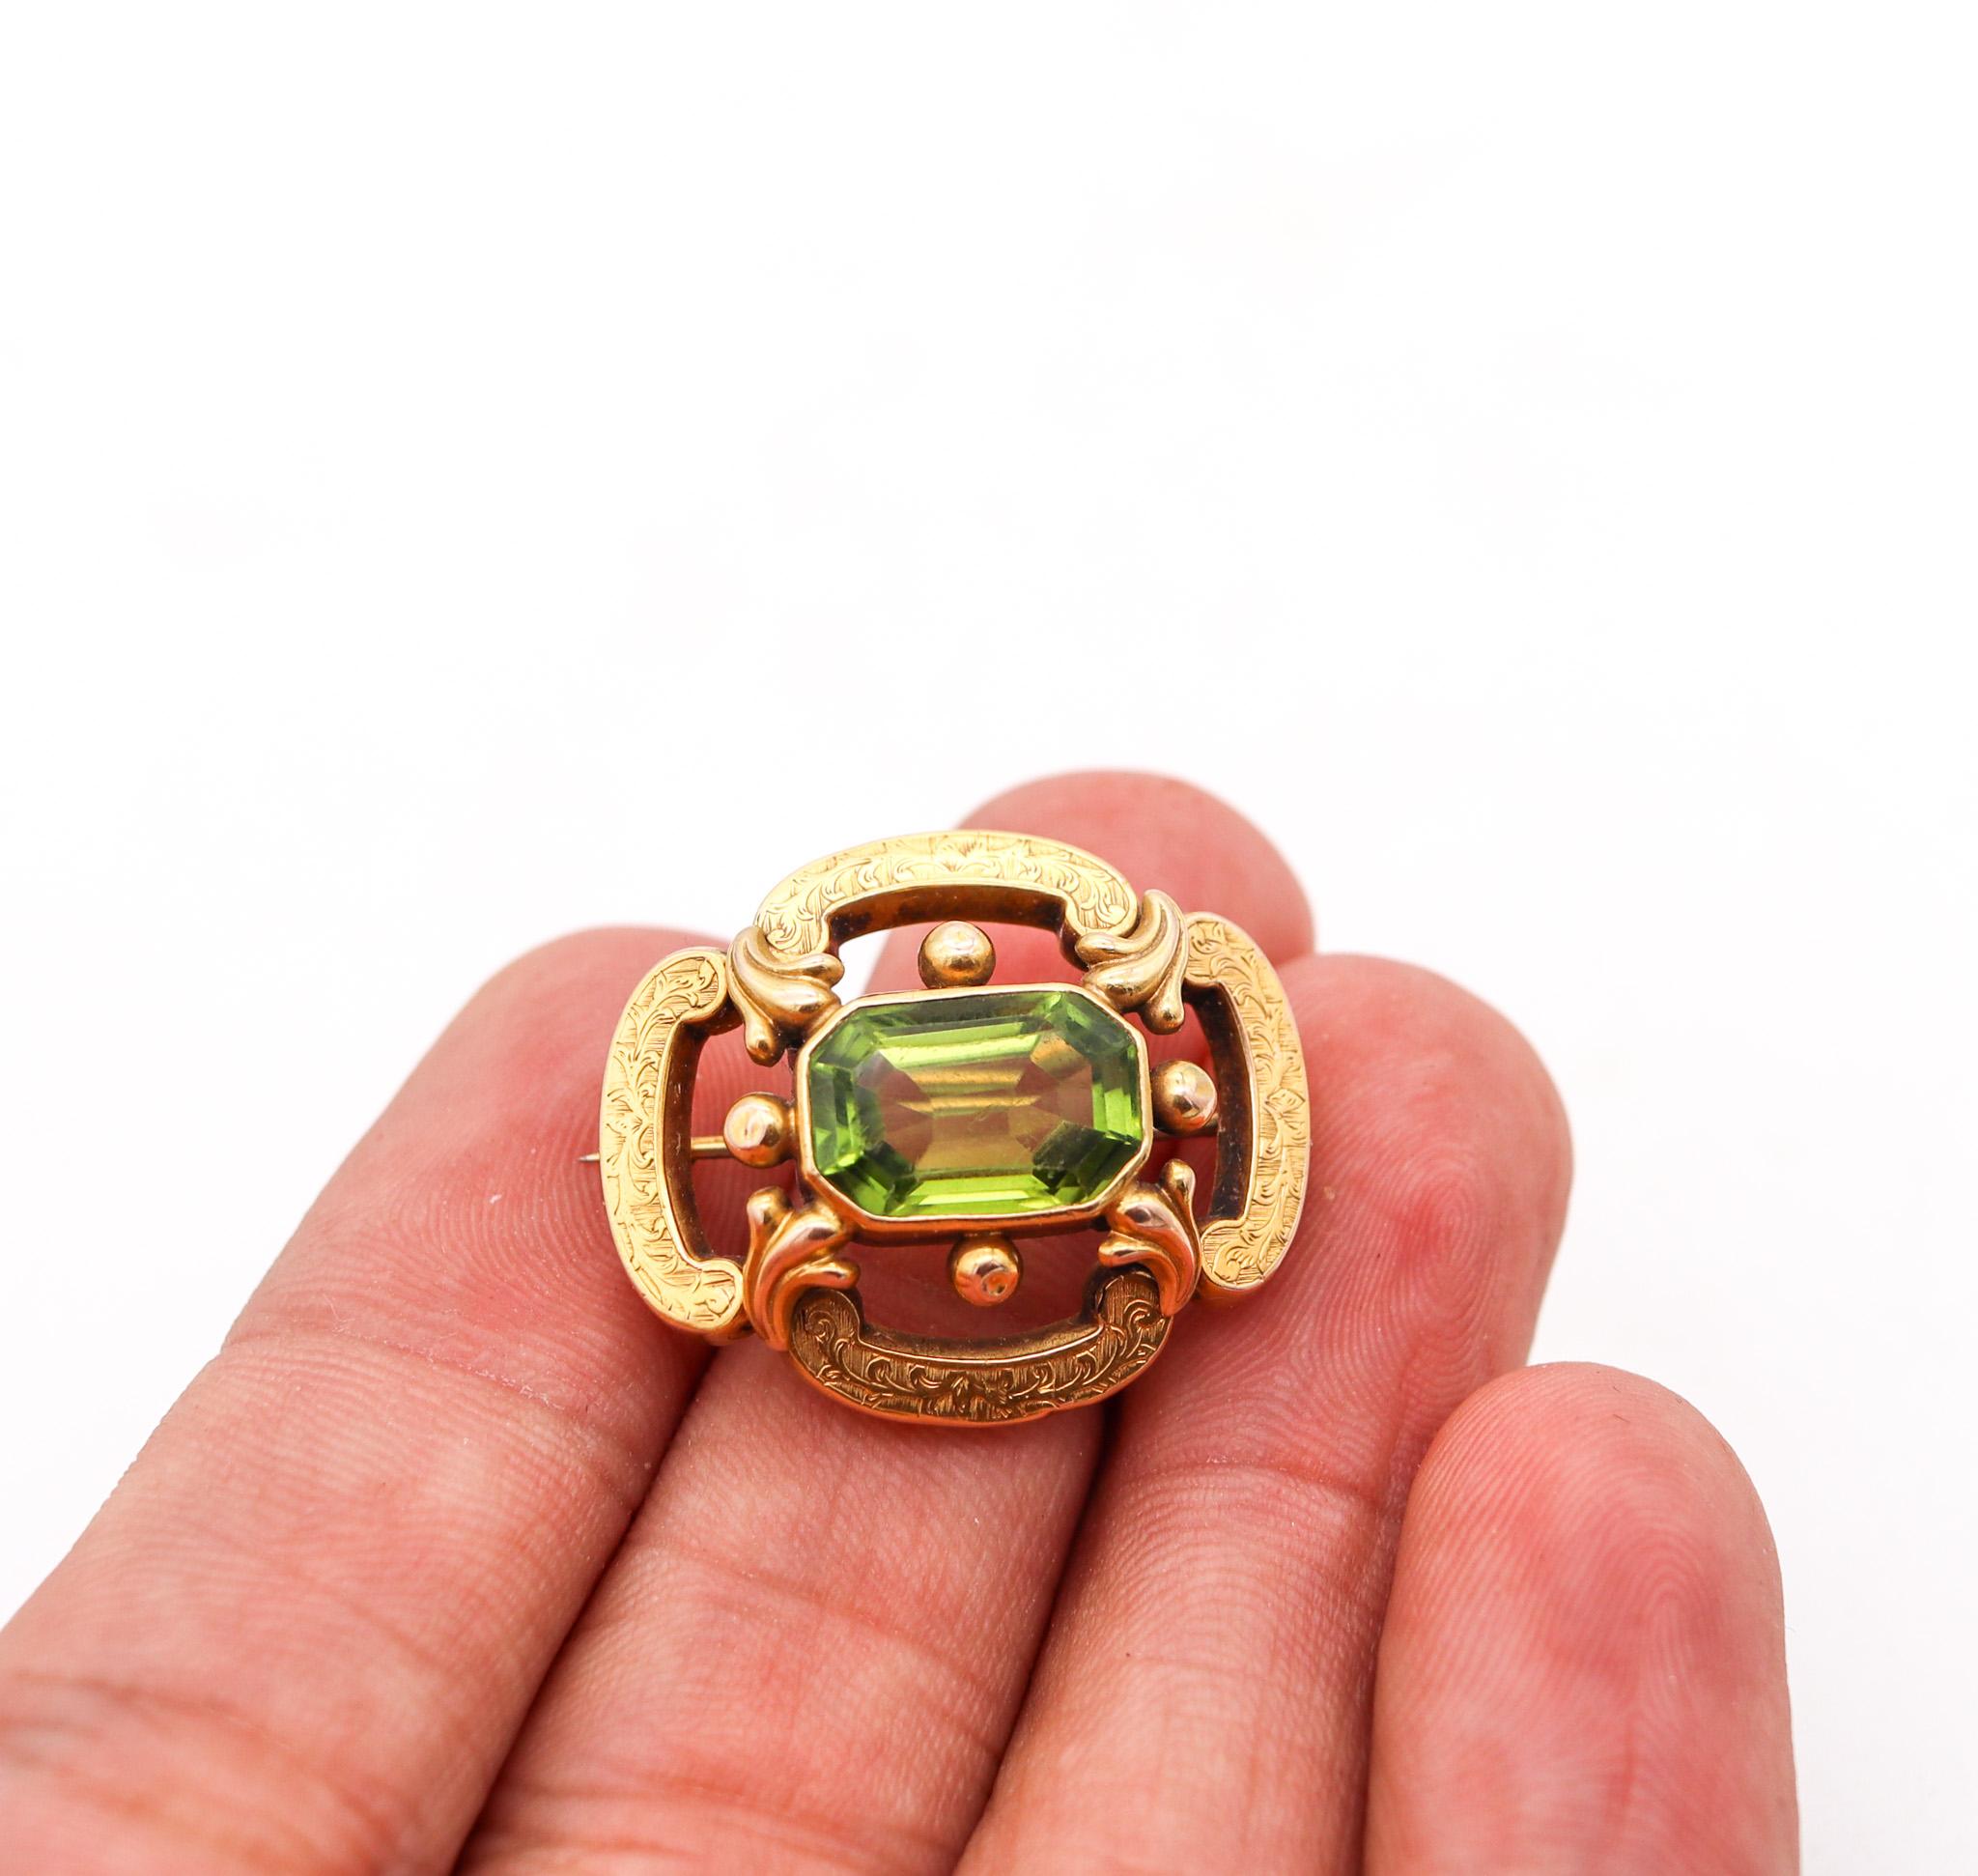 Women's Victorian 1880 Pin Brooch In 14Kt Yellow Gold With 5.74 Cts Vivid Green Peridot